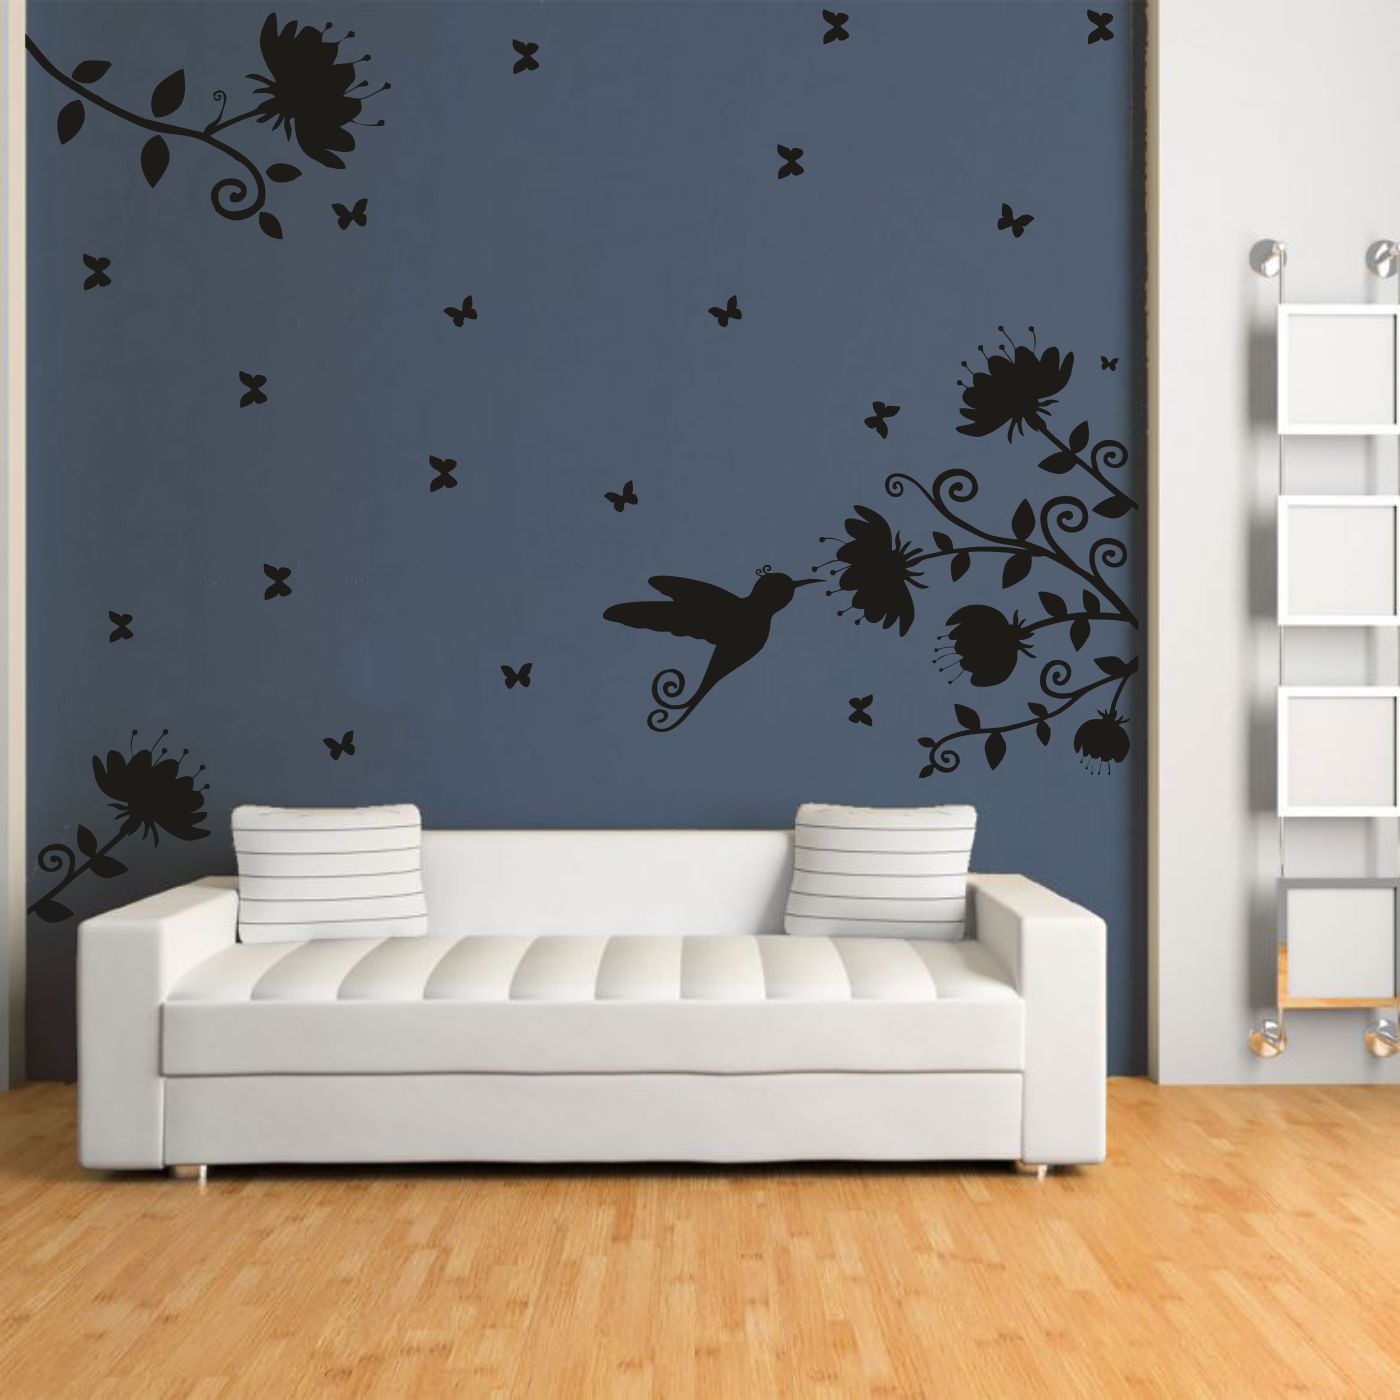 ORKA Butterfly Wall Decal Sticker 4  